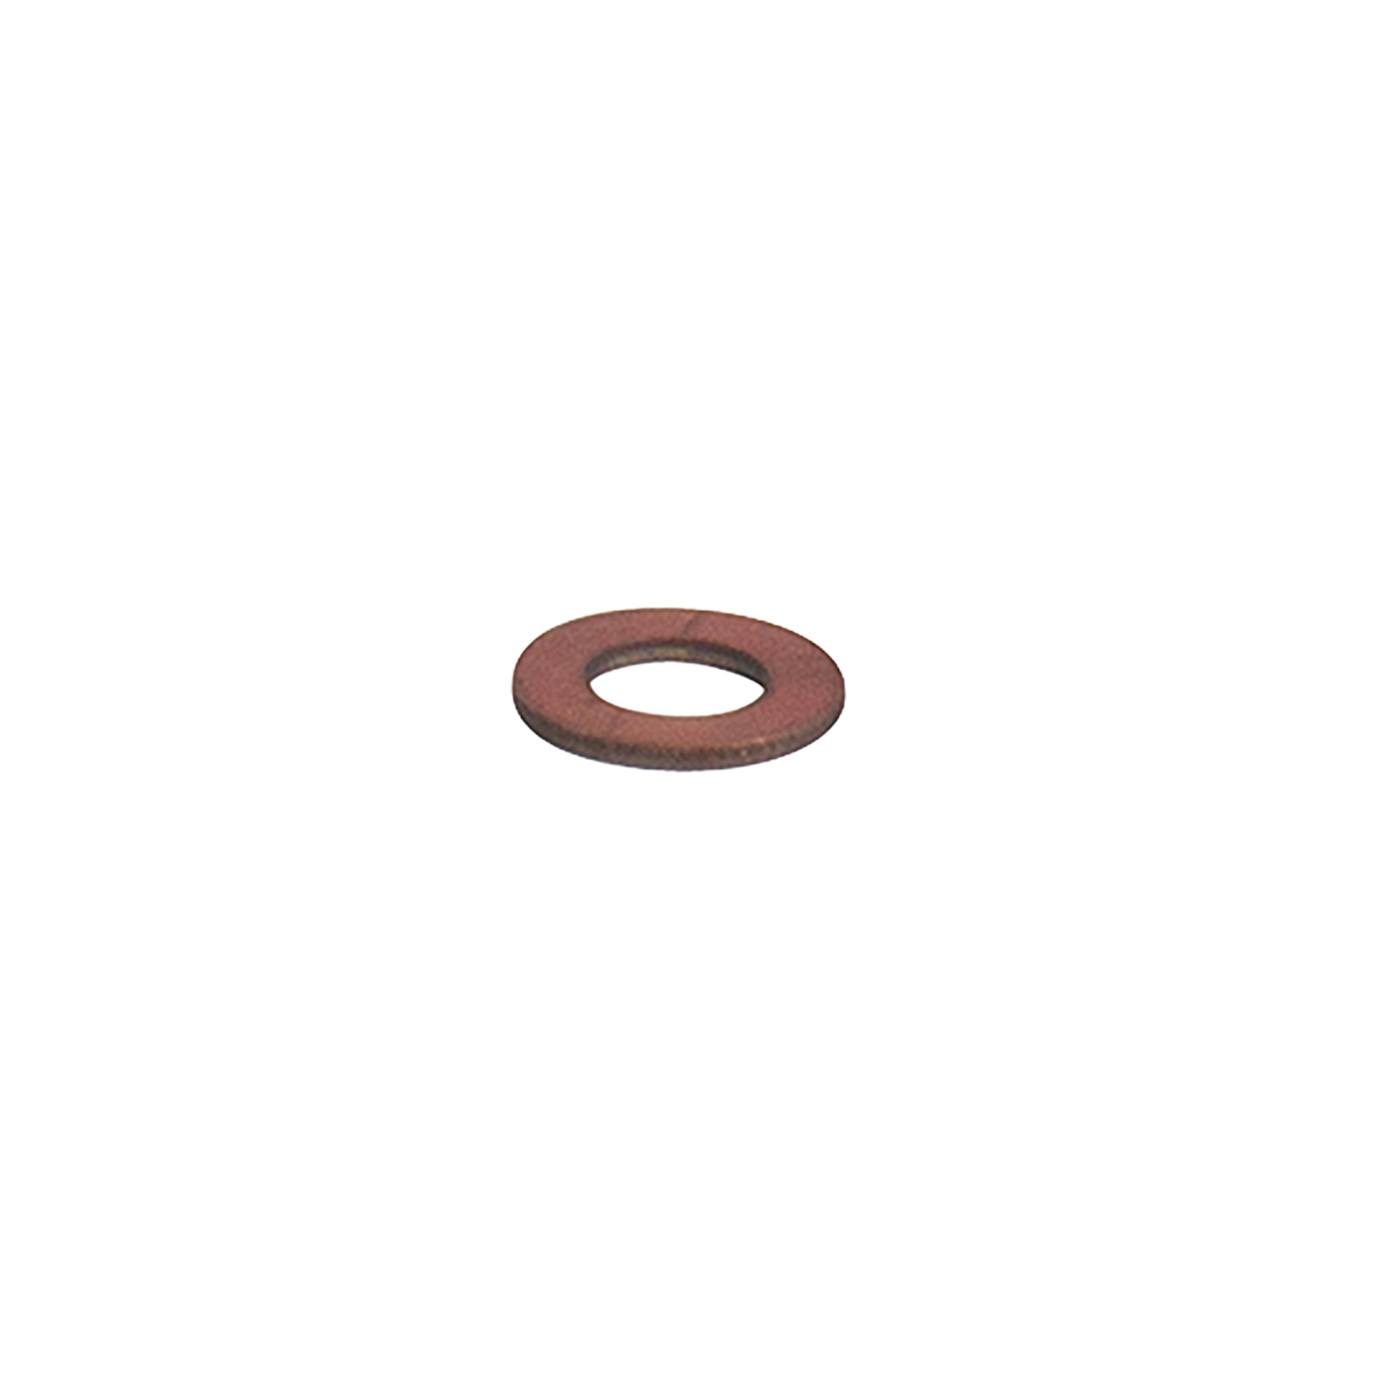 Copper washer for Ford 9" & 8" dropout housing 